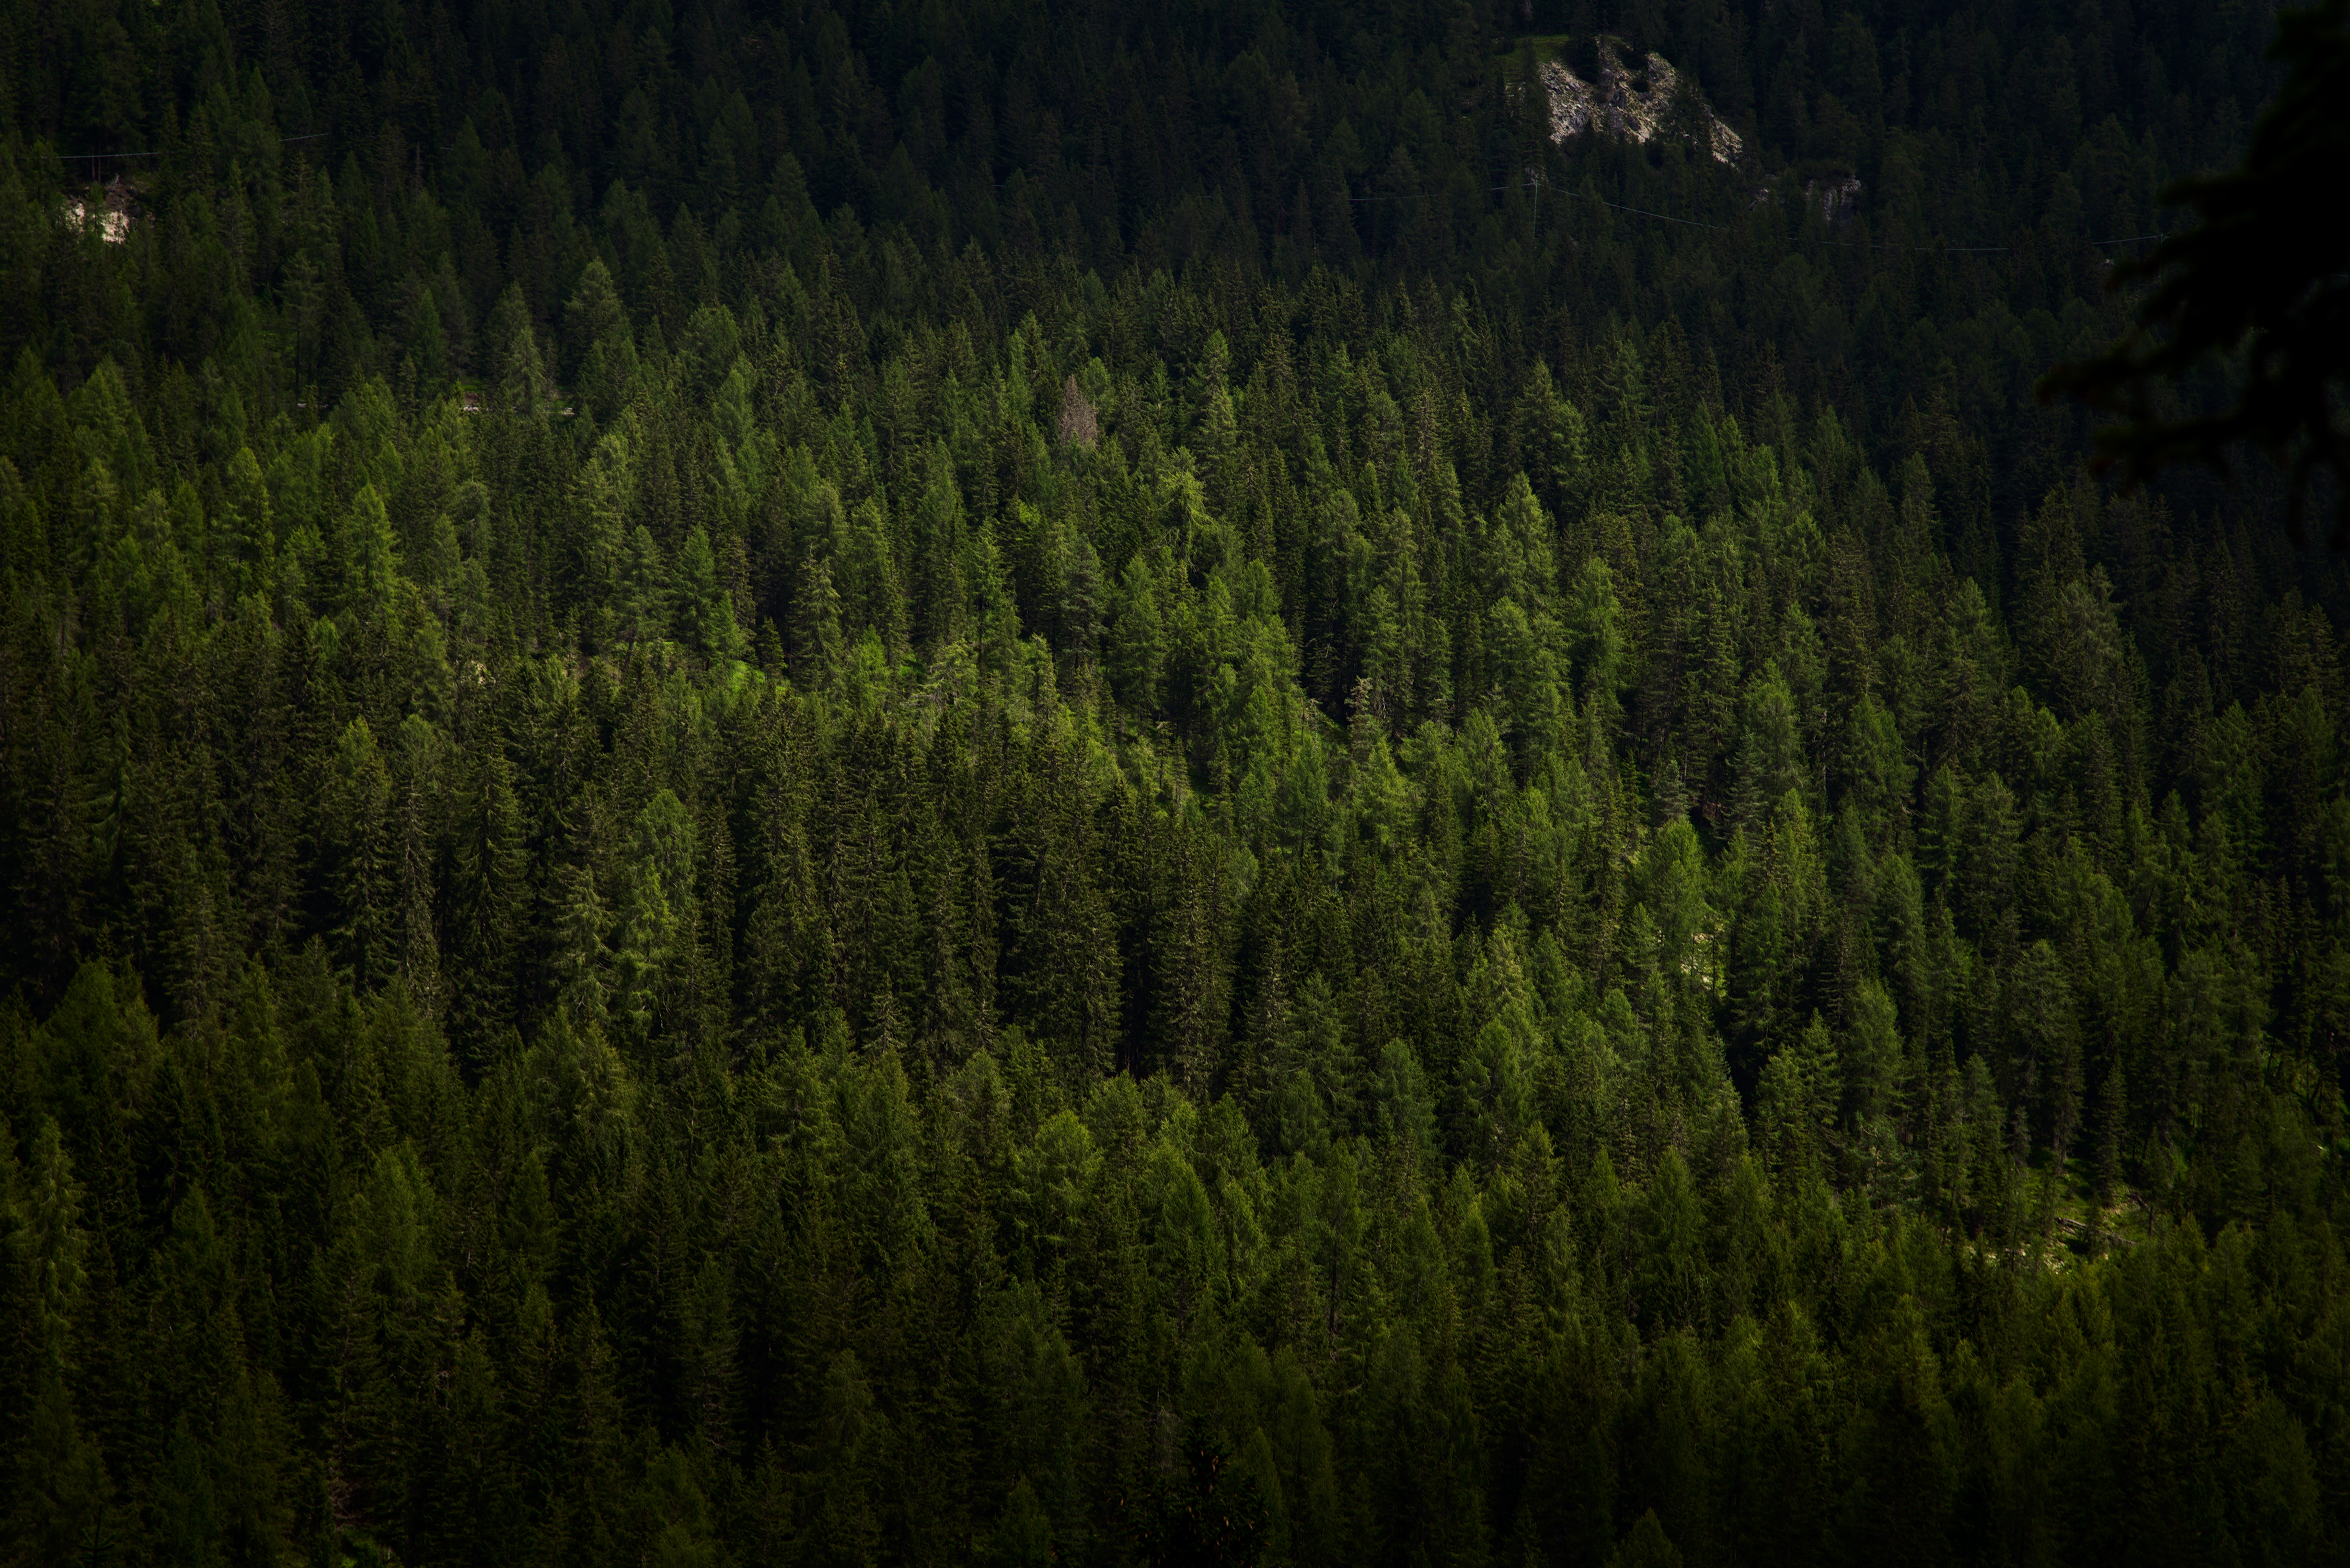 Download wallpaper 4904x3272 forest, trees, aerial view, green, vegetation, dark HD background